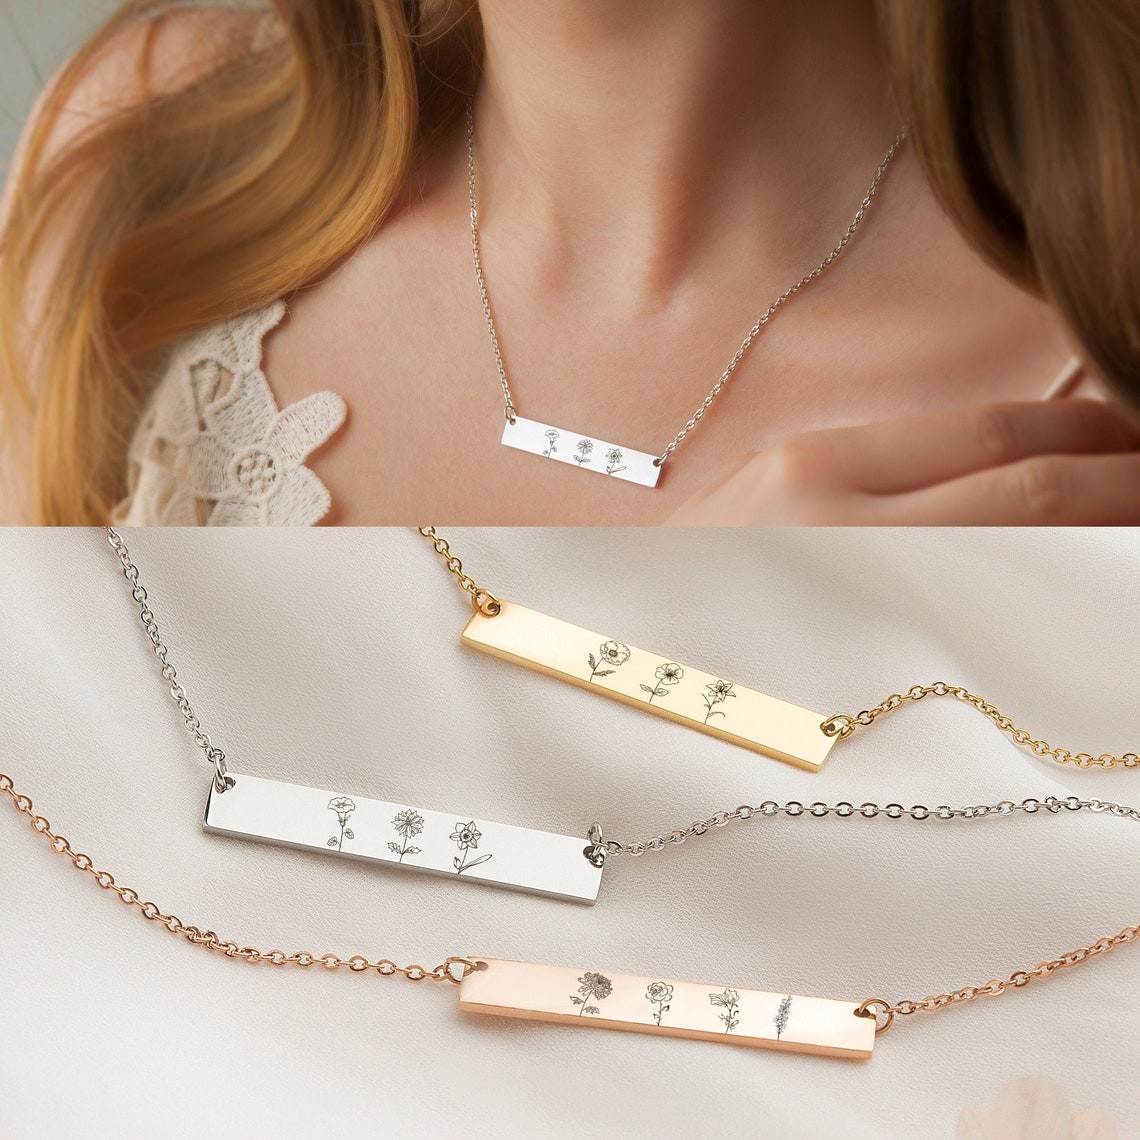 Personalized Birth Month Flower Bar Necklace with 1-6 Flowers